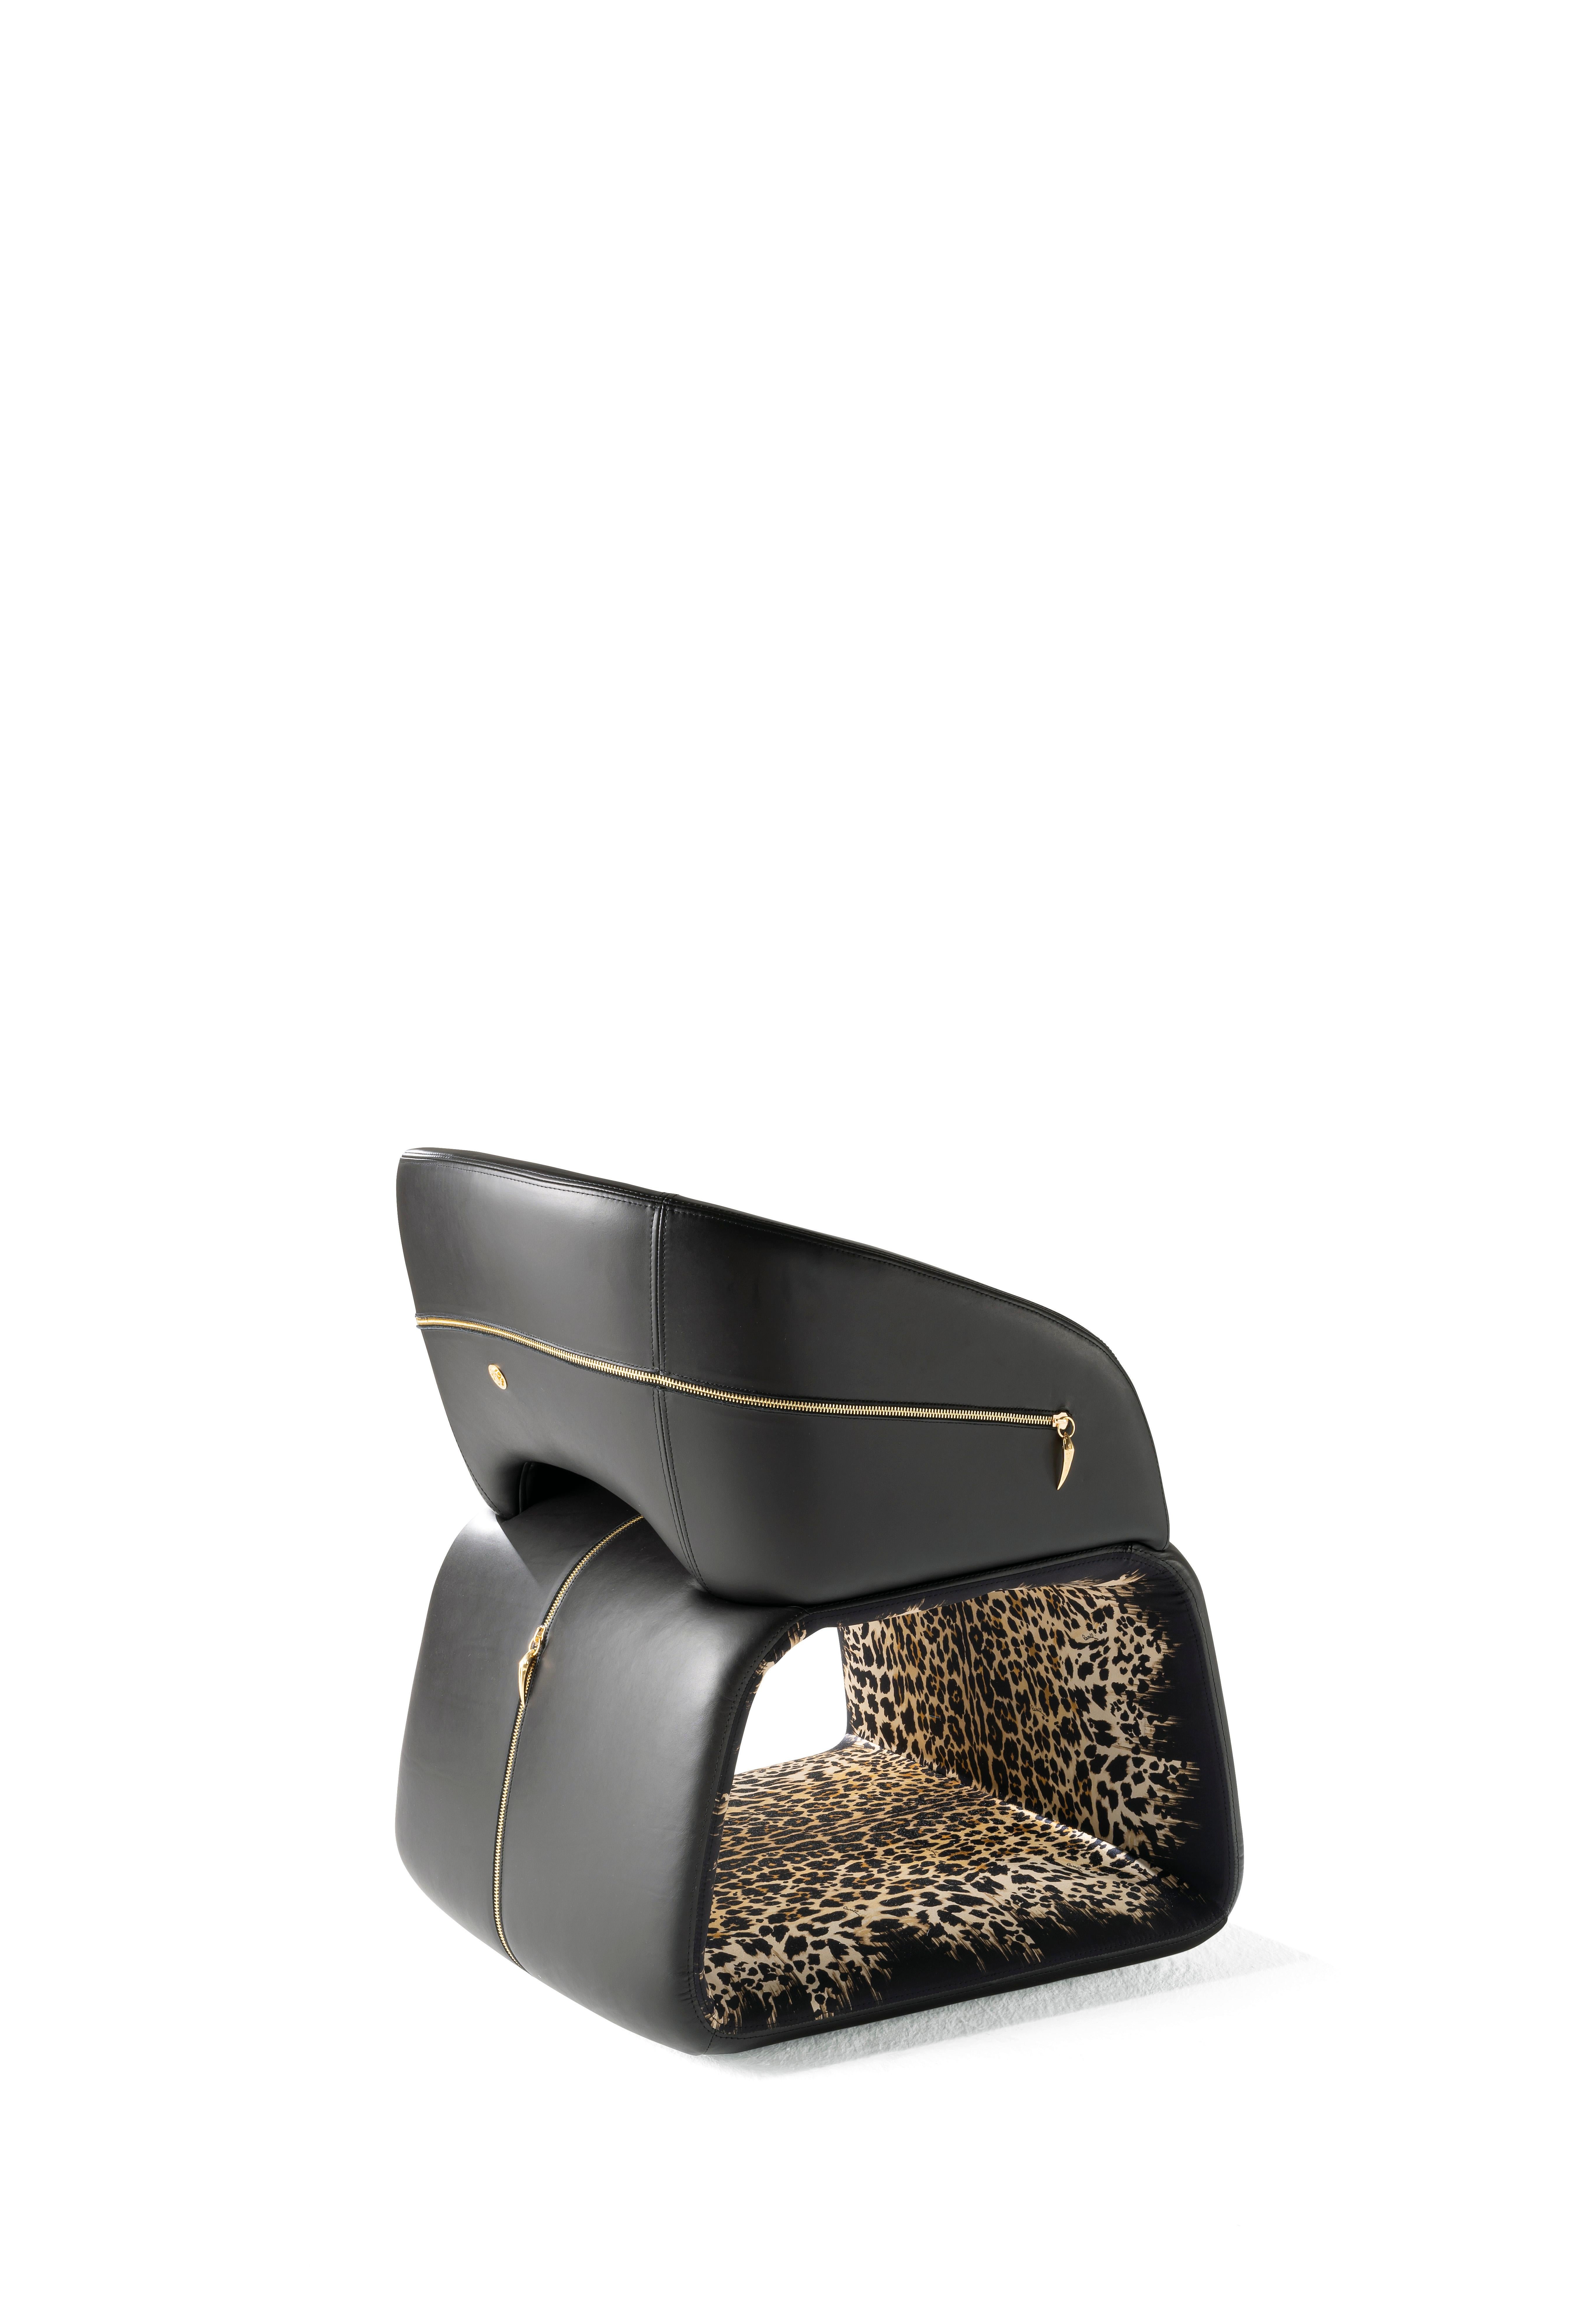 Italian 21st Century Wild Armchair in Black Leather by Roberto Cavalli Home Interiors For Sale